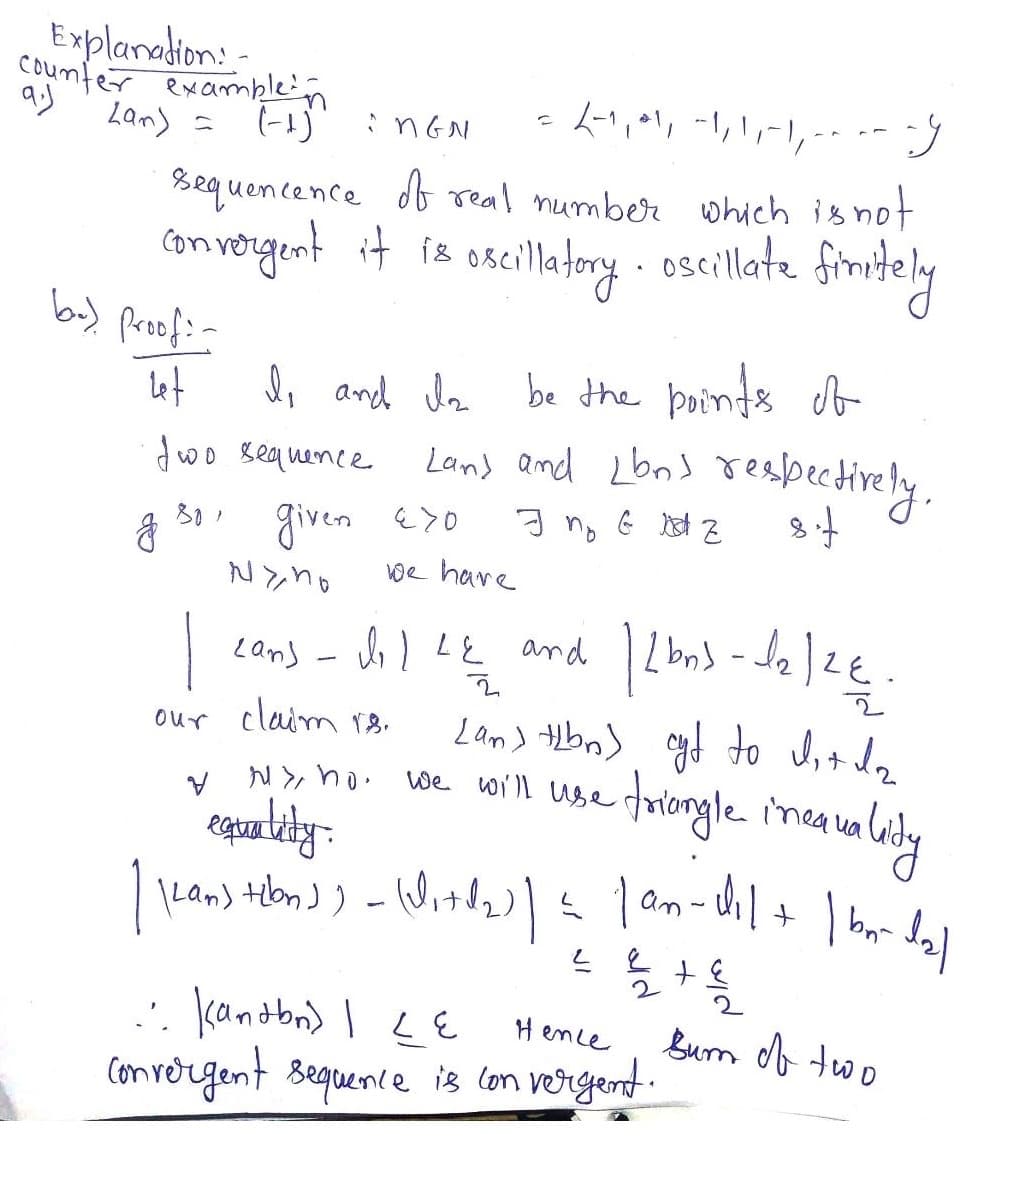 Explanation:
counter example in
Lan) = (-1)
9.)
= 2-1, 41,-1,1,-1,-- y
:nGN
sequencence of real number which is not
it is oscillatory.
convergent it is
oscillate
finitely
bu) Proof: -
let
two sequence
g 30,
I, and Is
V
given Exo
Nyno
be the points of
Land and Lbn> respectively.
I no G Z
sif
1
our claim rs.
we have
Ny ho.
Lan) - do I Le and
2
[an] tibn) cyf to dit da
we will use triangle inea
inequality
1203-10 12€.
12/24
equality.
| Kean) telon)) - (Wit (₂) | = | an-dil + | b₁-d₂]
222 +2
Hence
... Kanton) | LE
Convergent sequence is convergent.
Sum of two